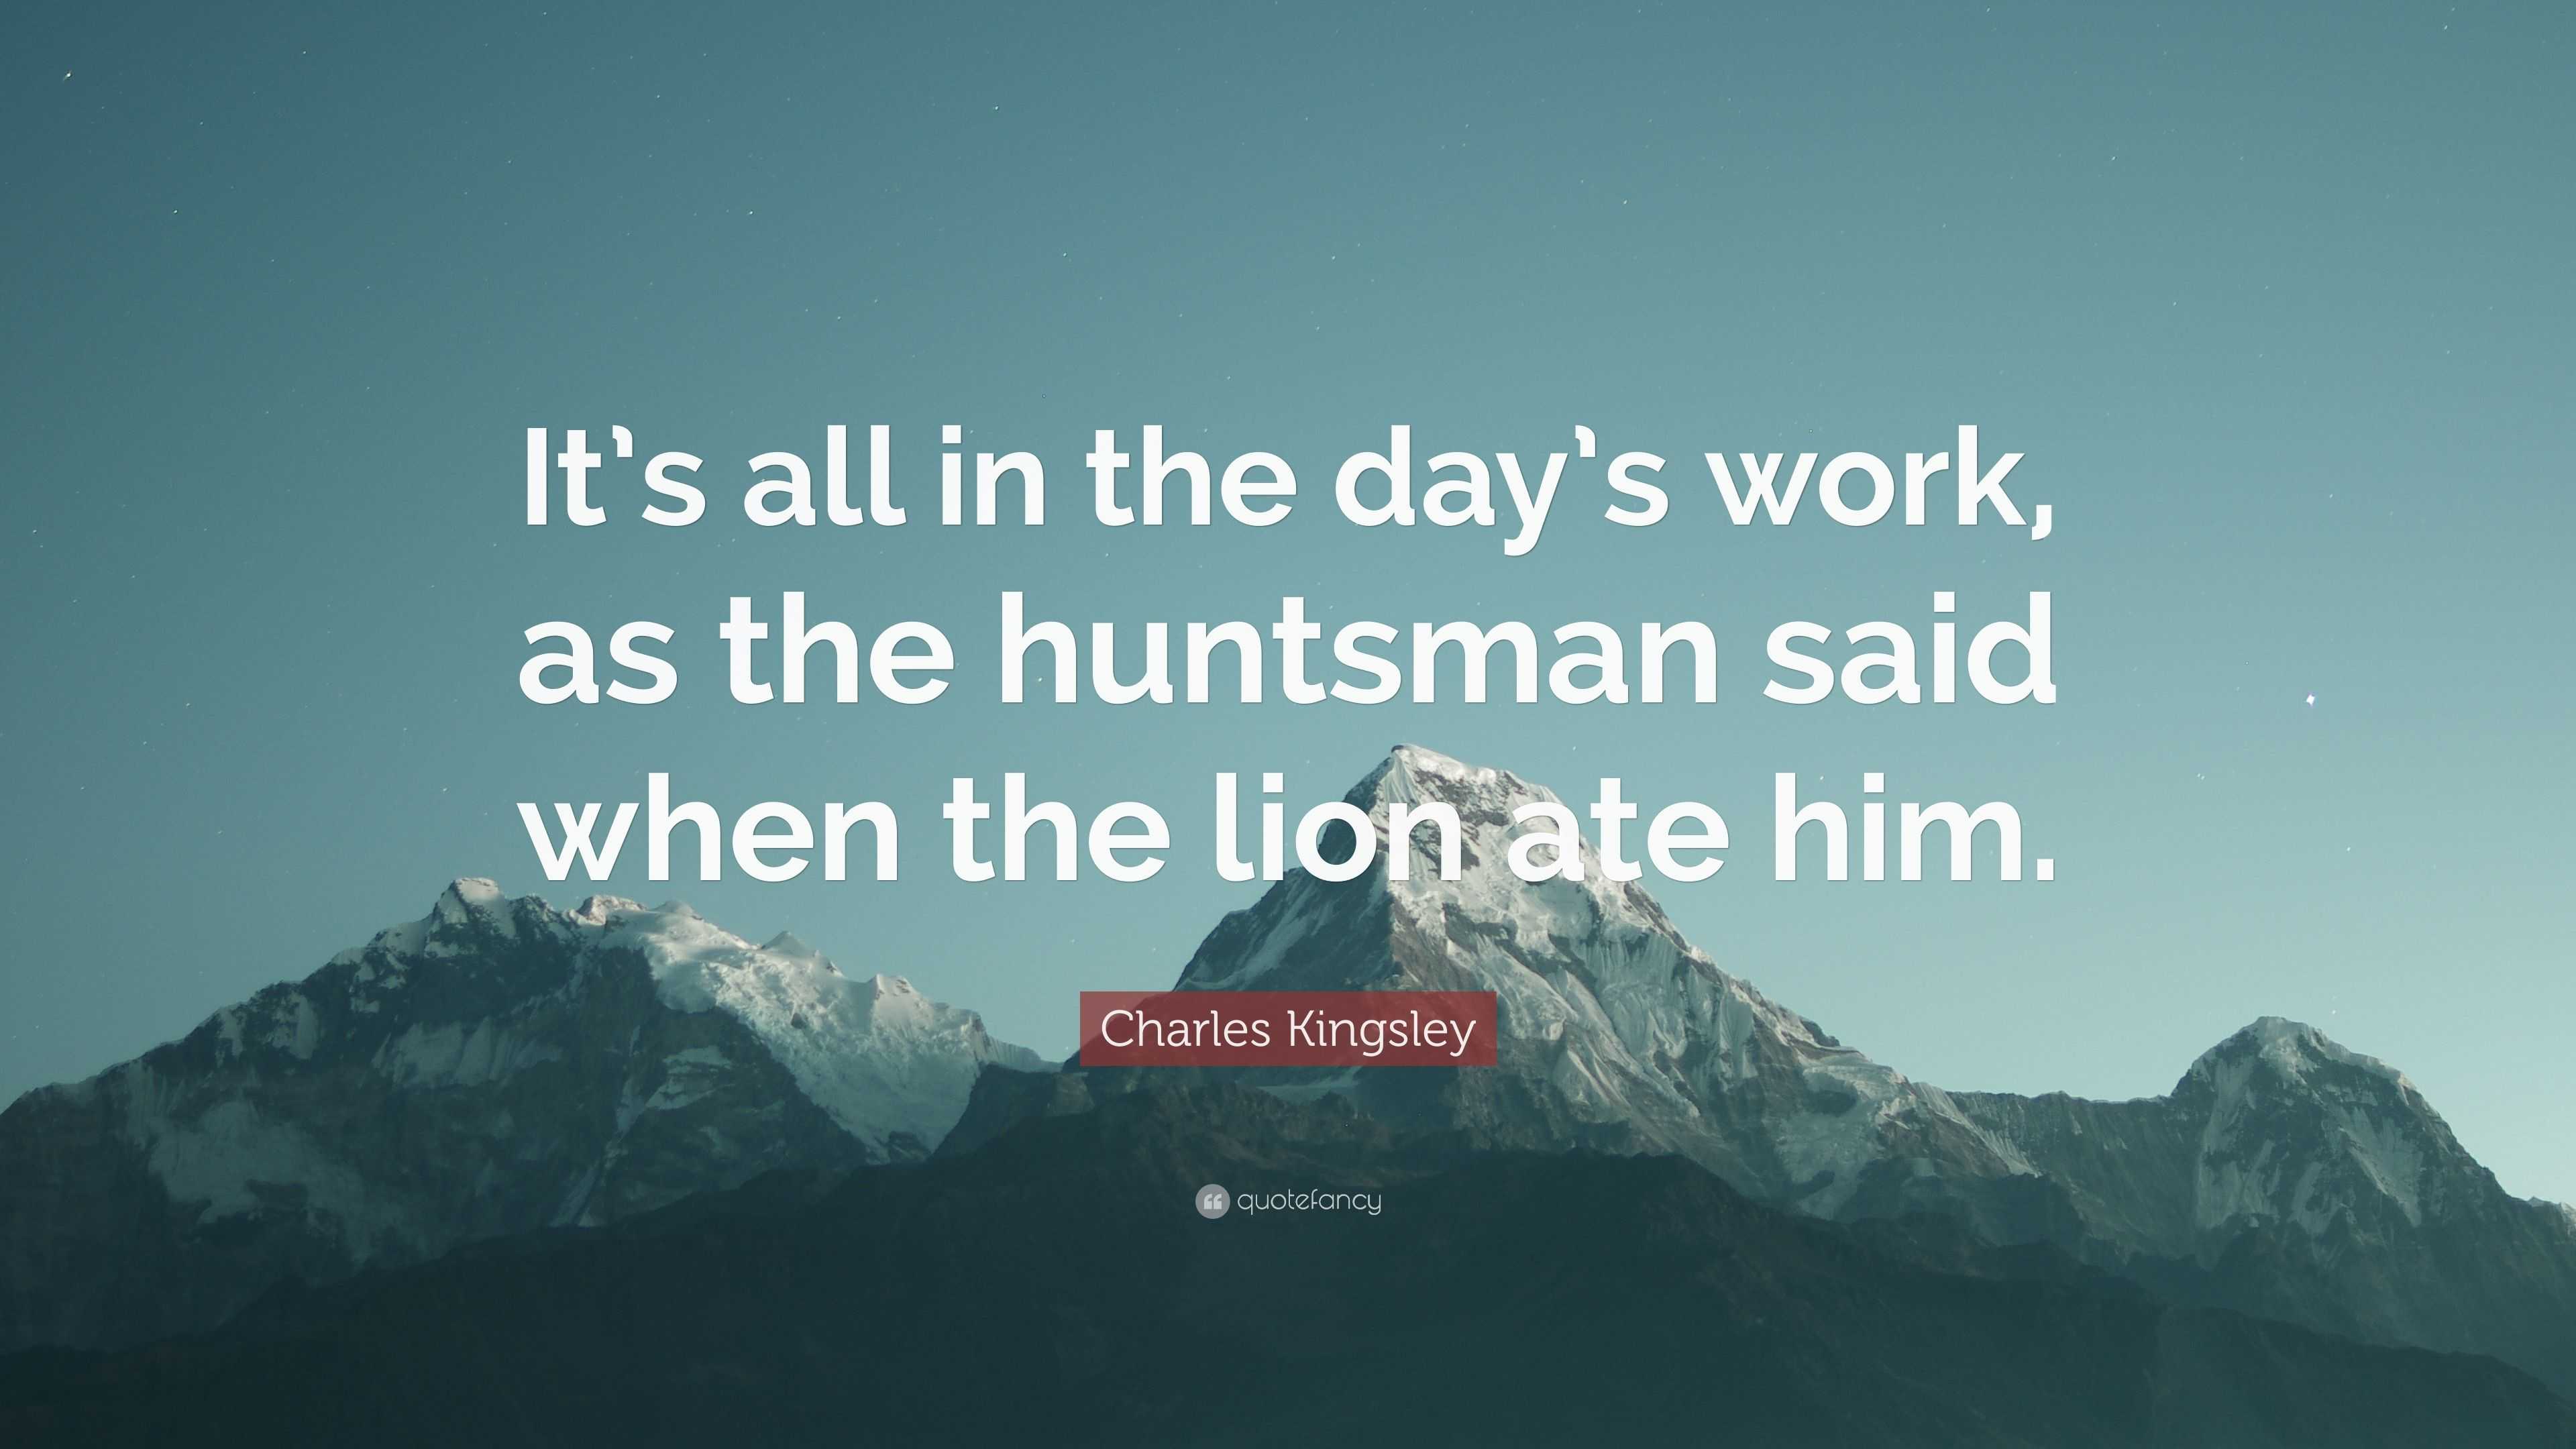 Charles Kingsley Quote: “It's All In The Day's Work, As The Huntsman Said When The Lion